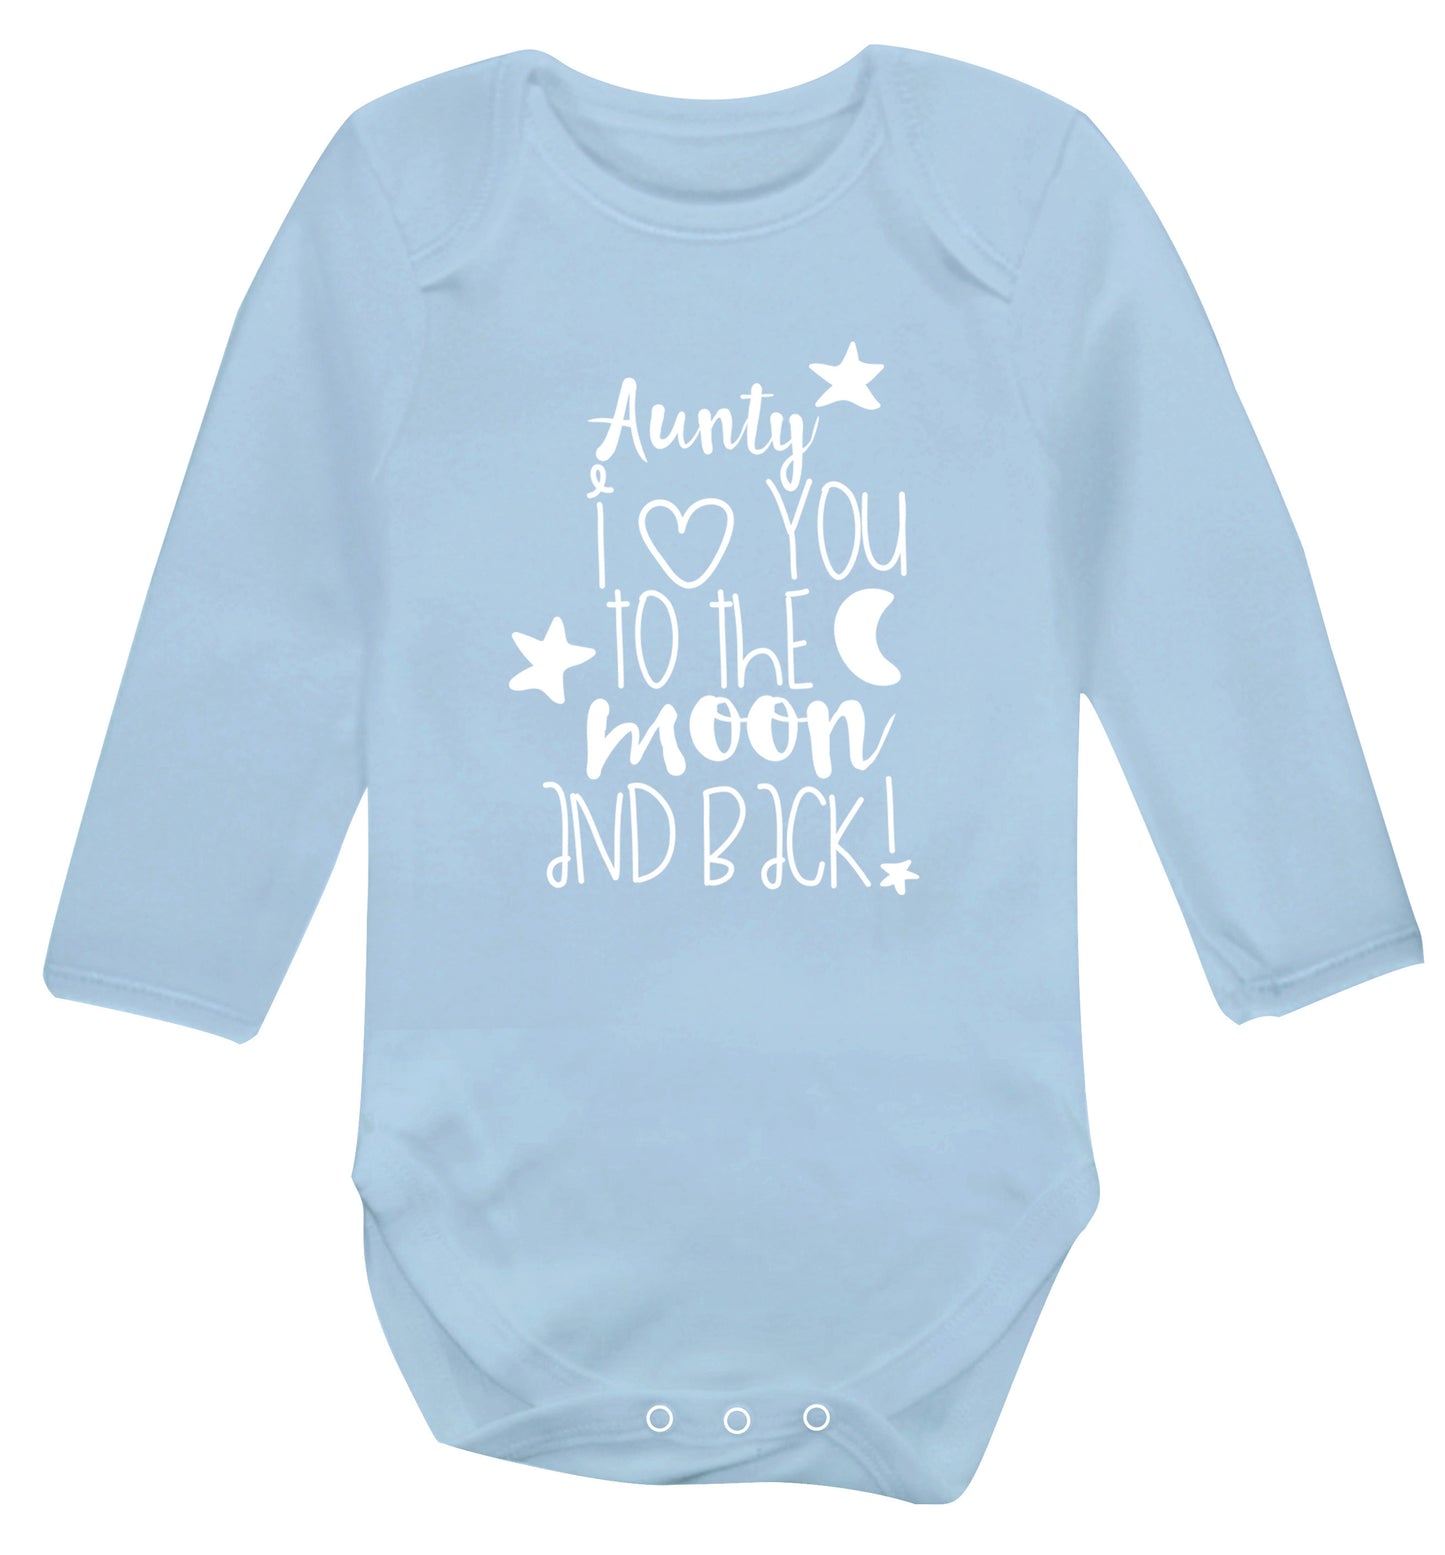 Aunty I love you to the moon and back Baby Vest long sleeved pale blue 6-12 months